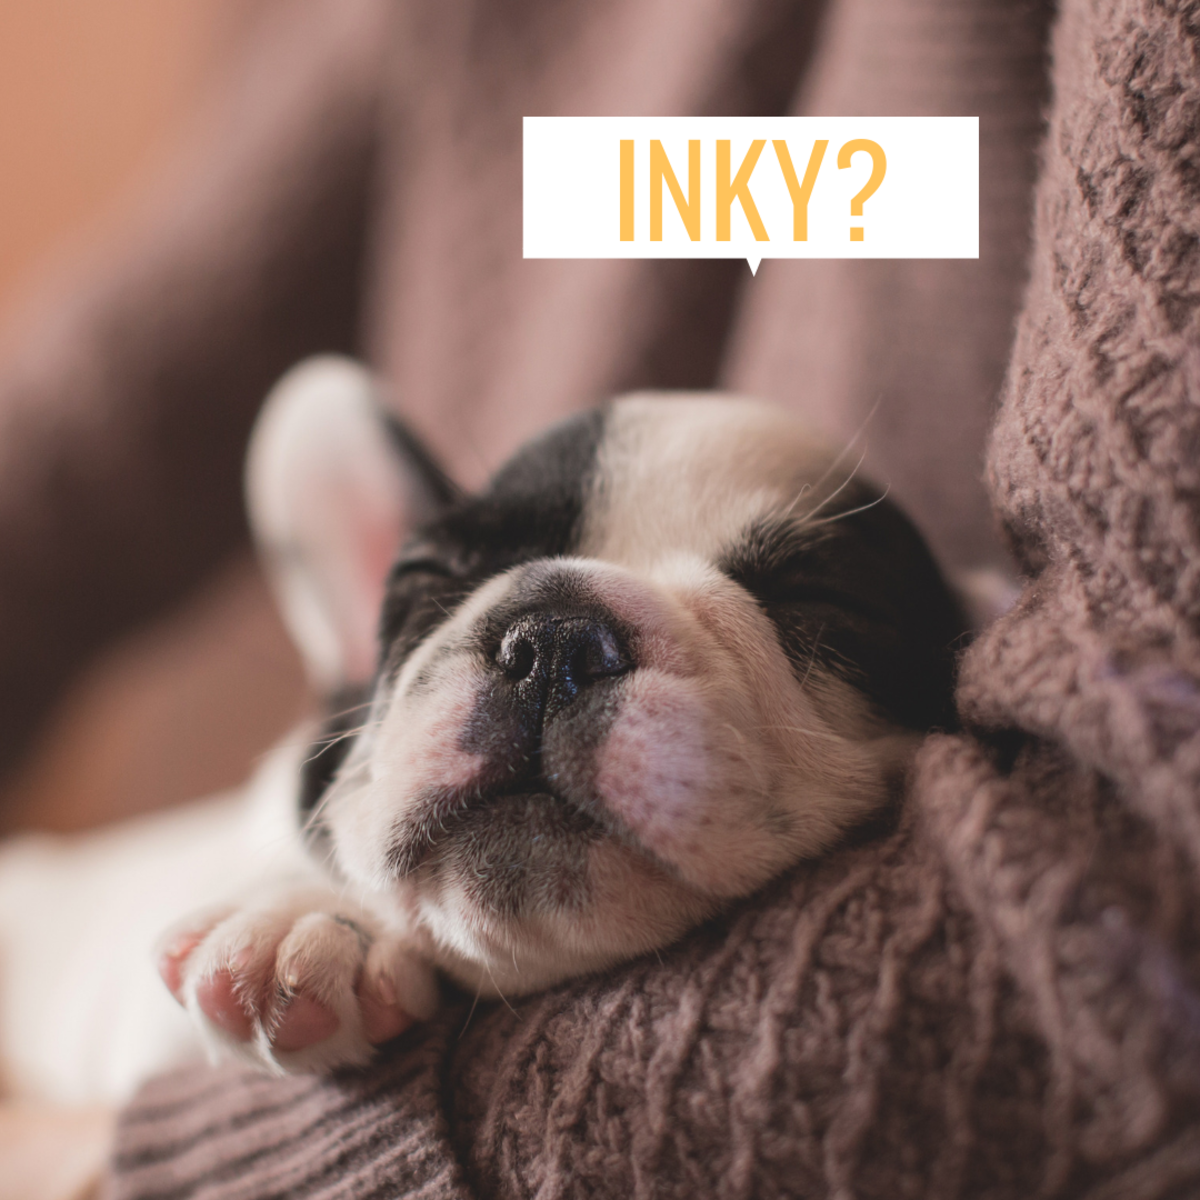 Could you new best friend be an Inky?